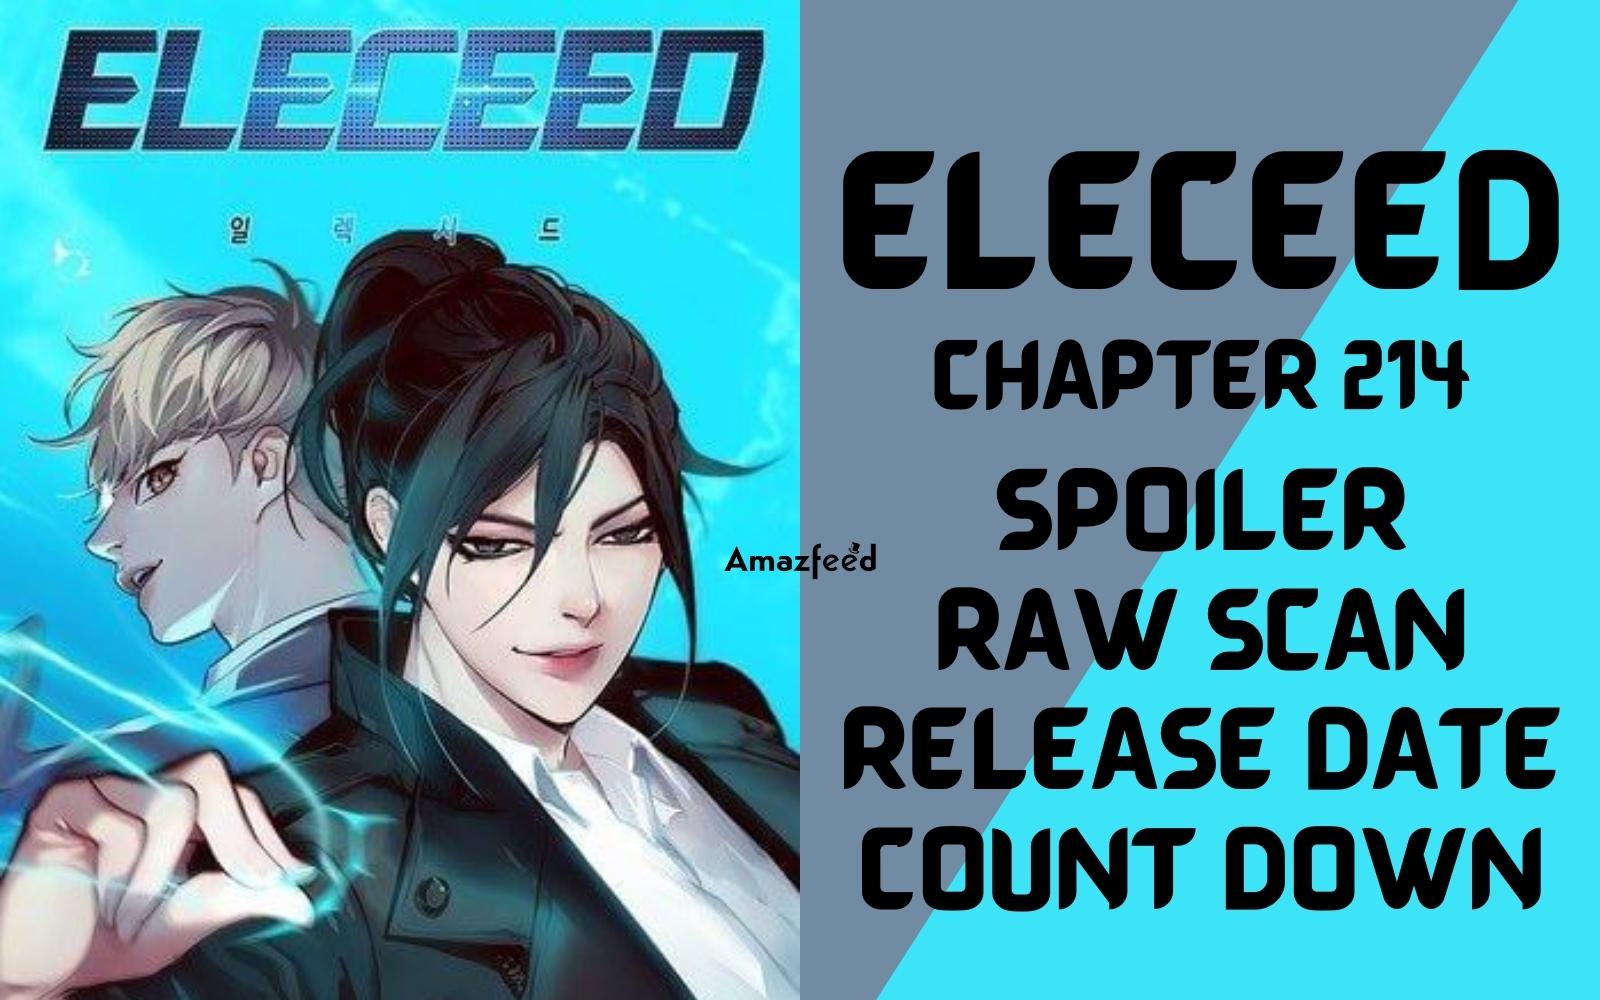 Eleceed Chapter 214 Spoilers, Raw Scan, Color Page, Release Date & Everything You Want to Know